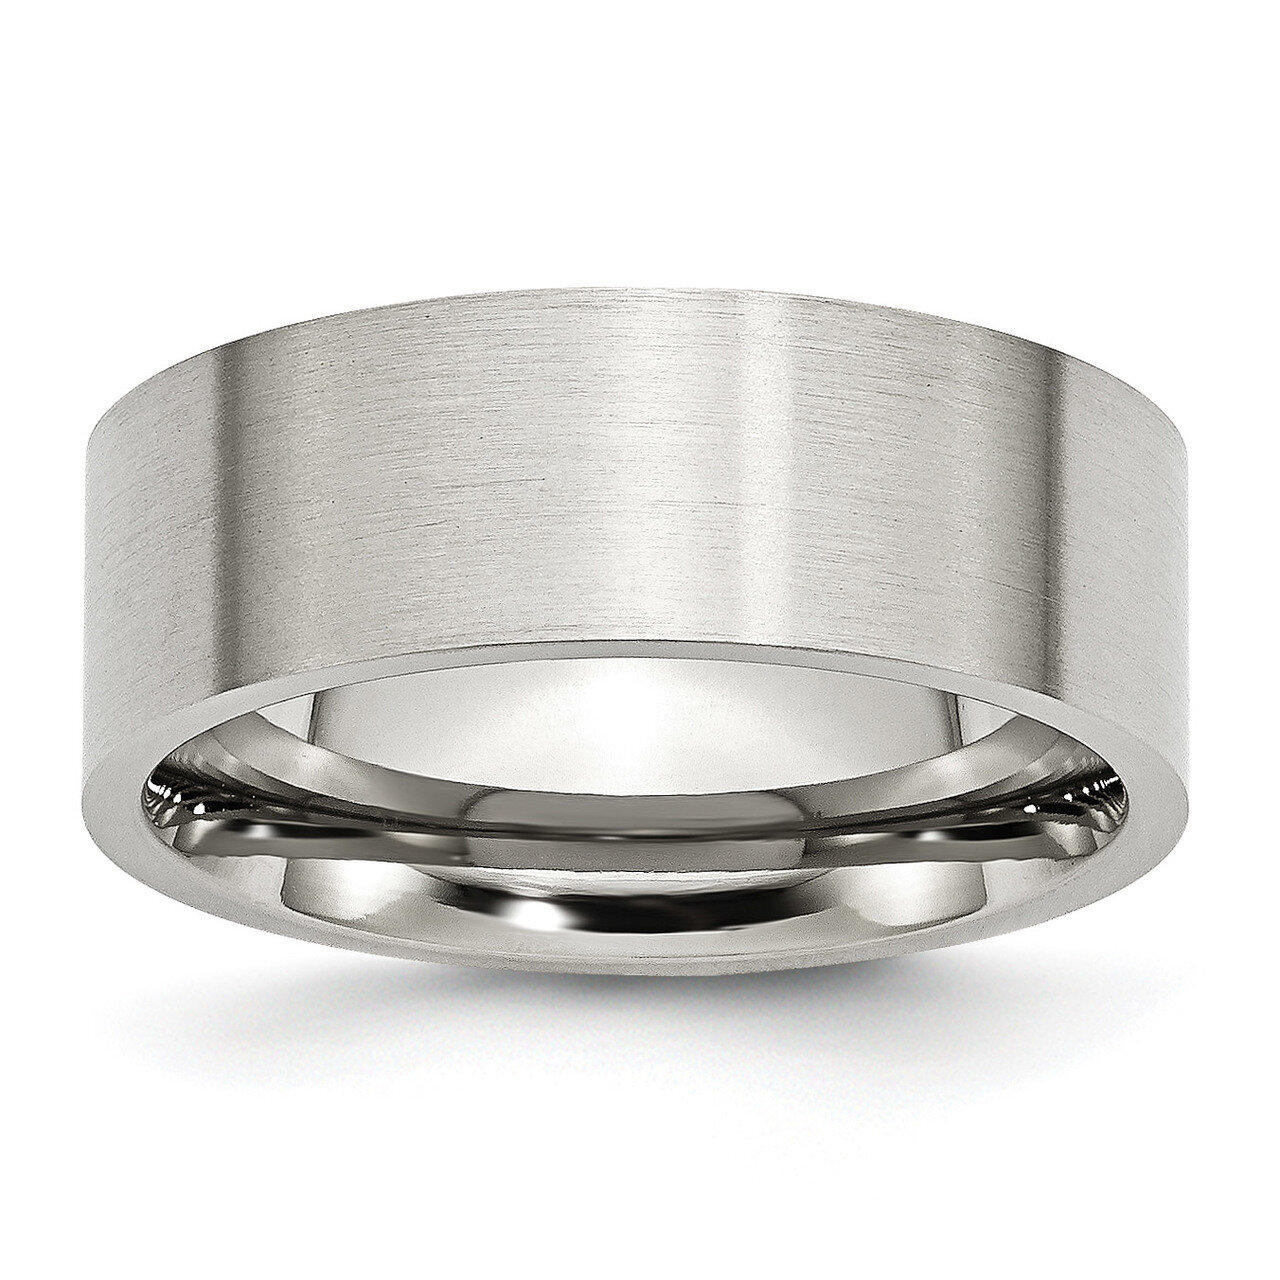 Flat 8mm Brushed Band Stainless Steel SR6 Engravable